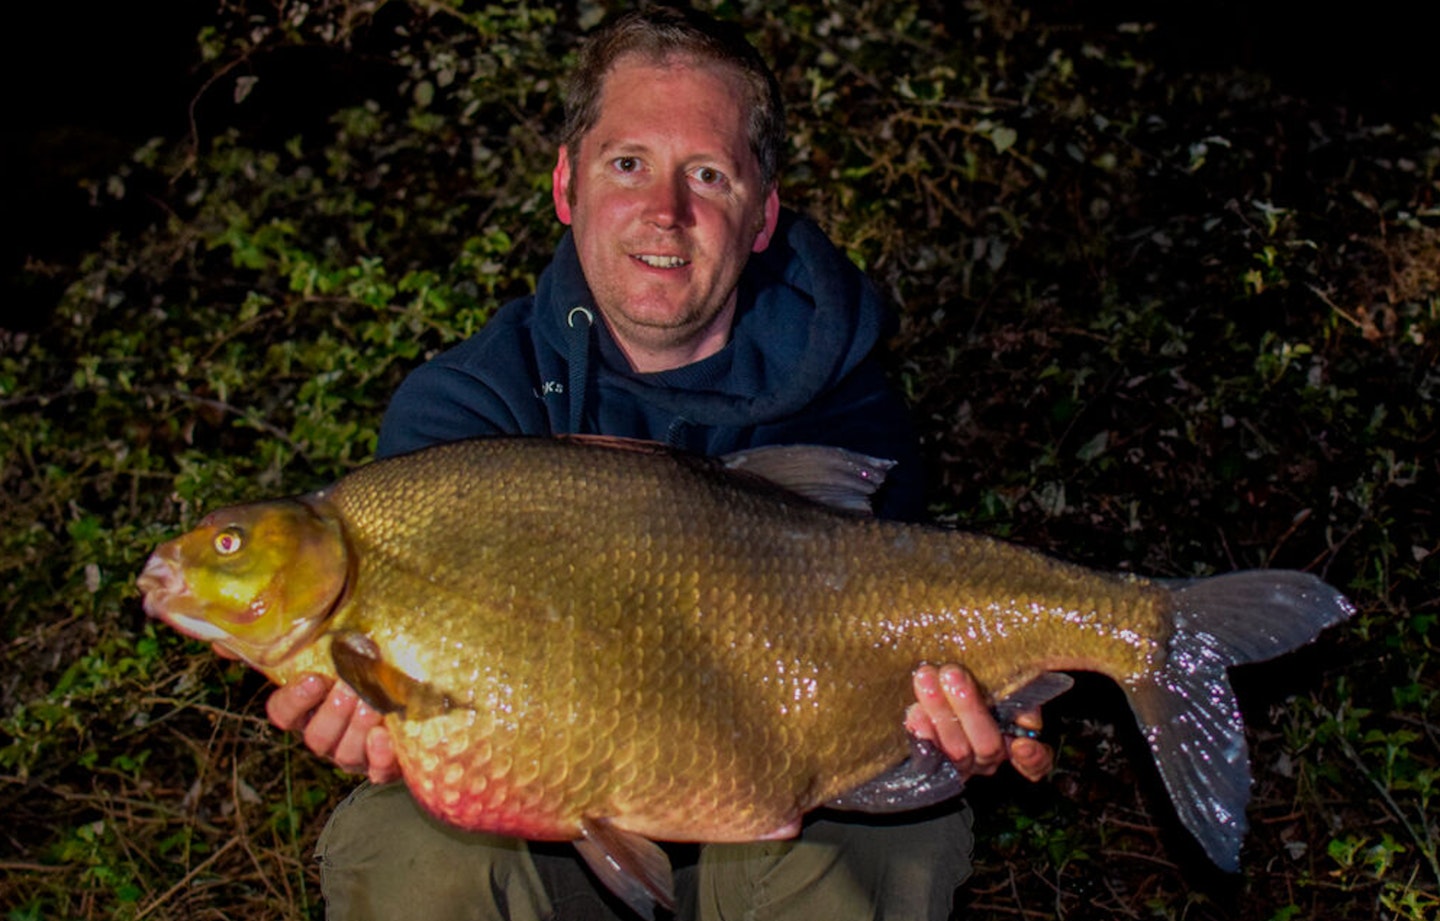 Only bream in the lake is 18lb 12oz